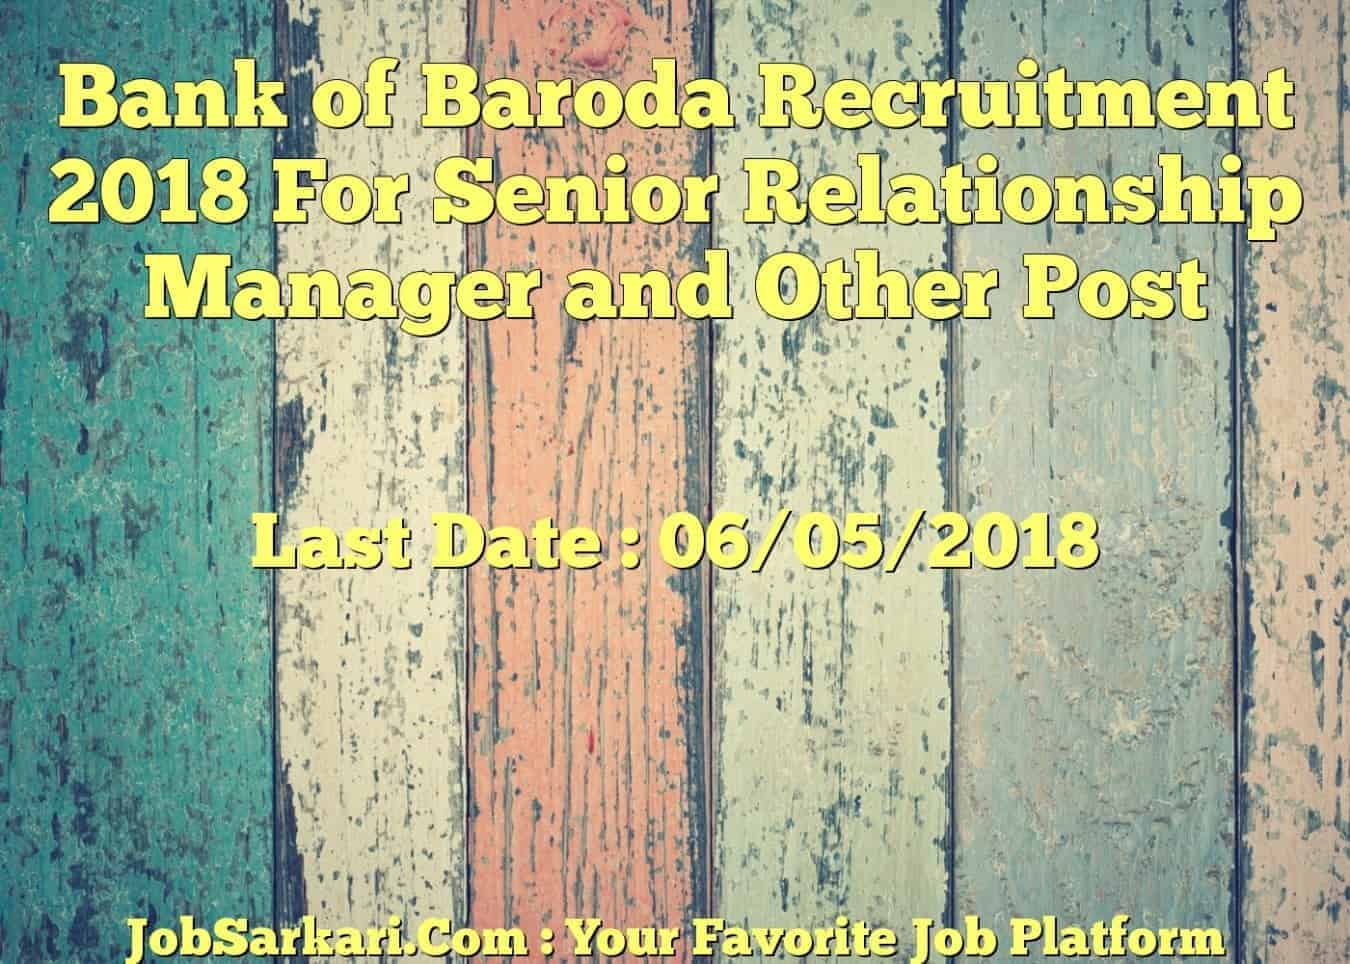 Bank of Baroda Recruitment 2018 For Senior Relationship Manager and Other Post